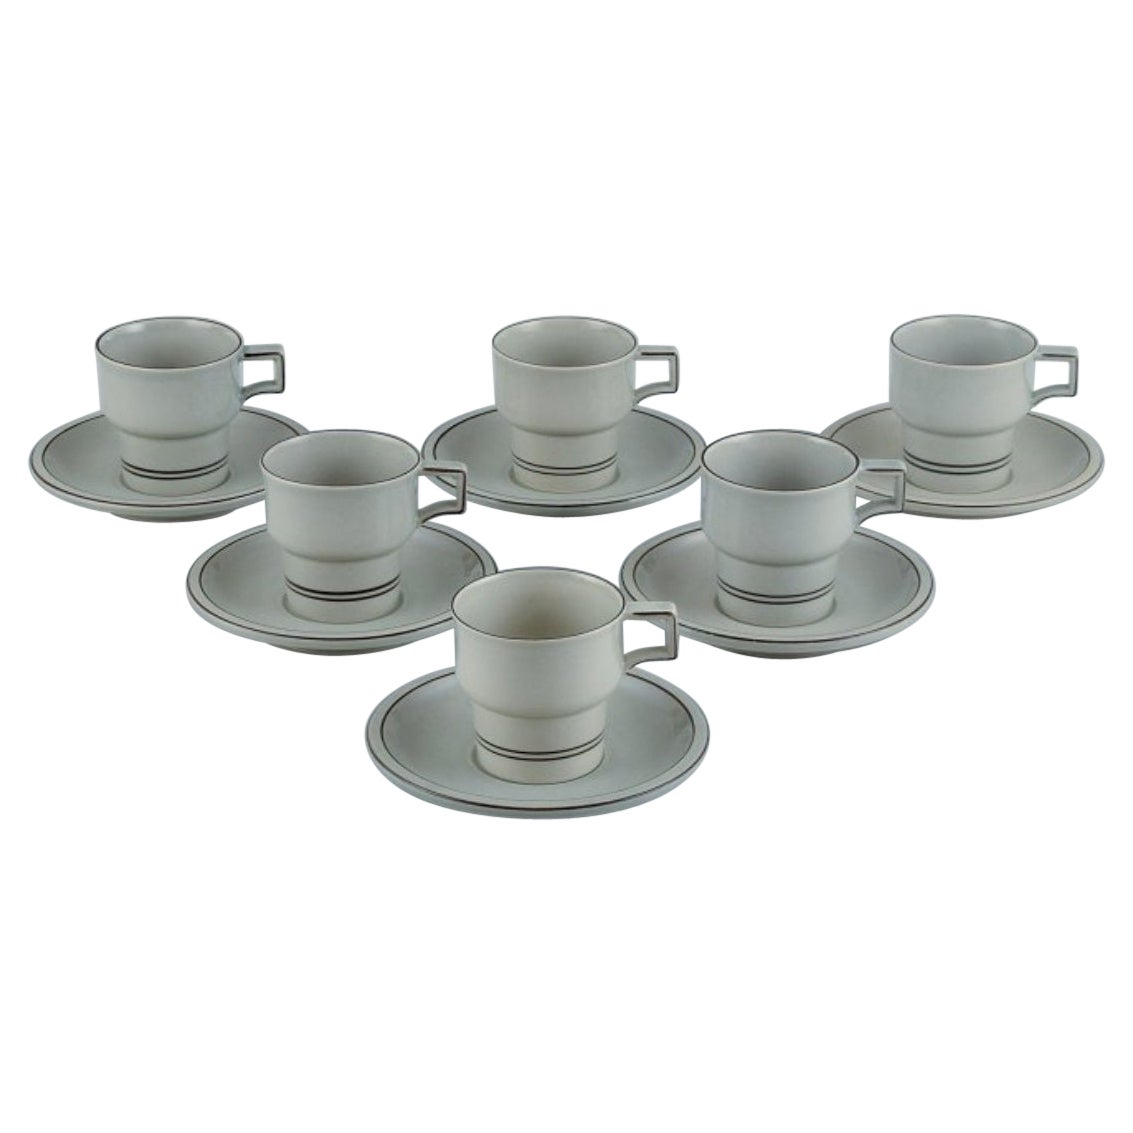 Jens Harald Quistgaard, Bing & Grøndahl. Colombia, six coffee cups with saucers For Sale